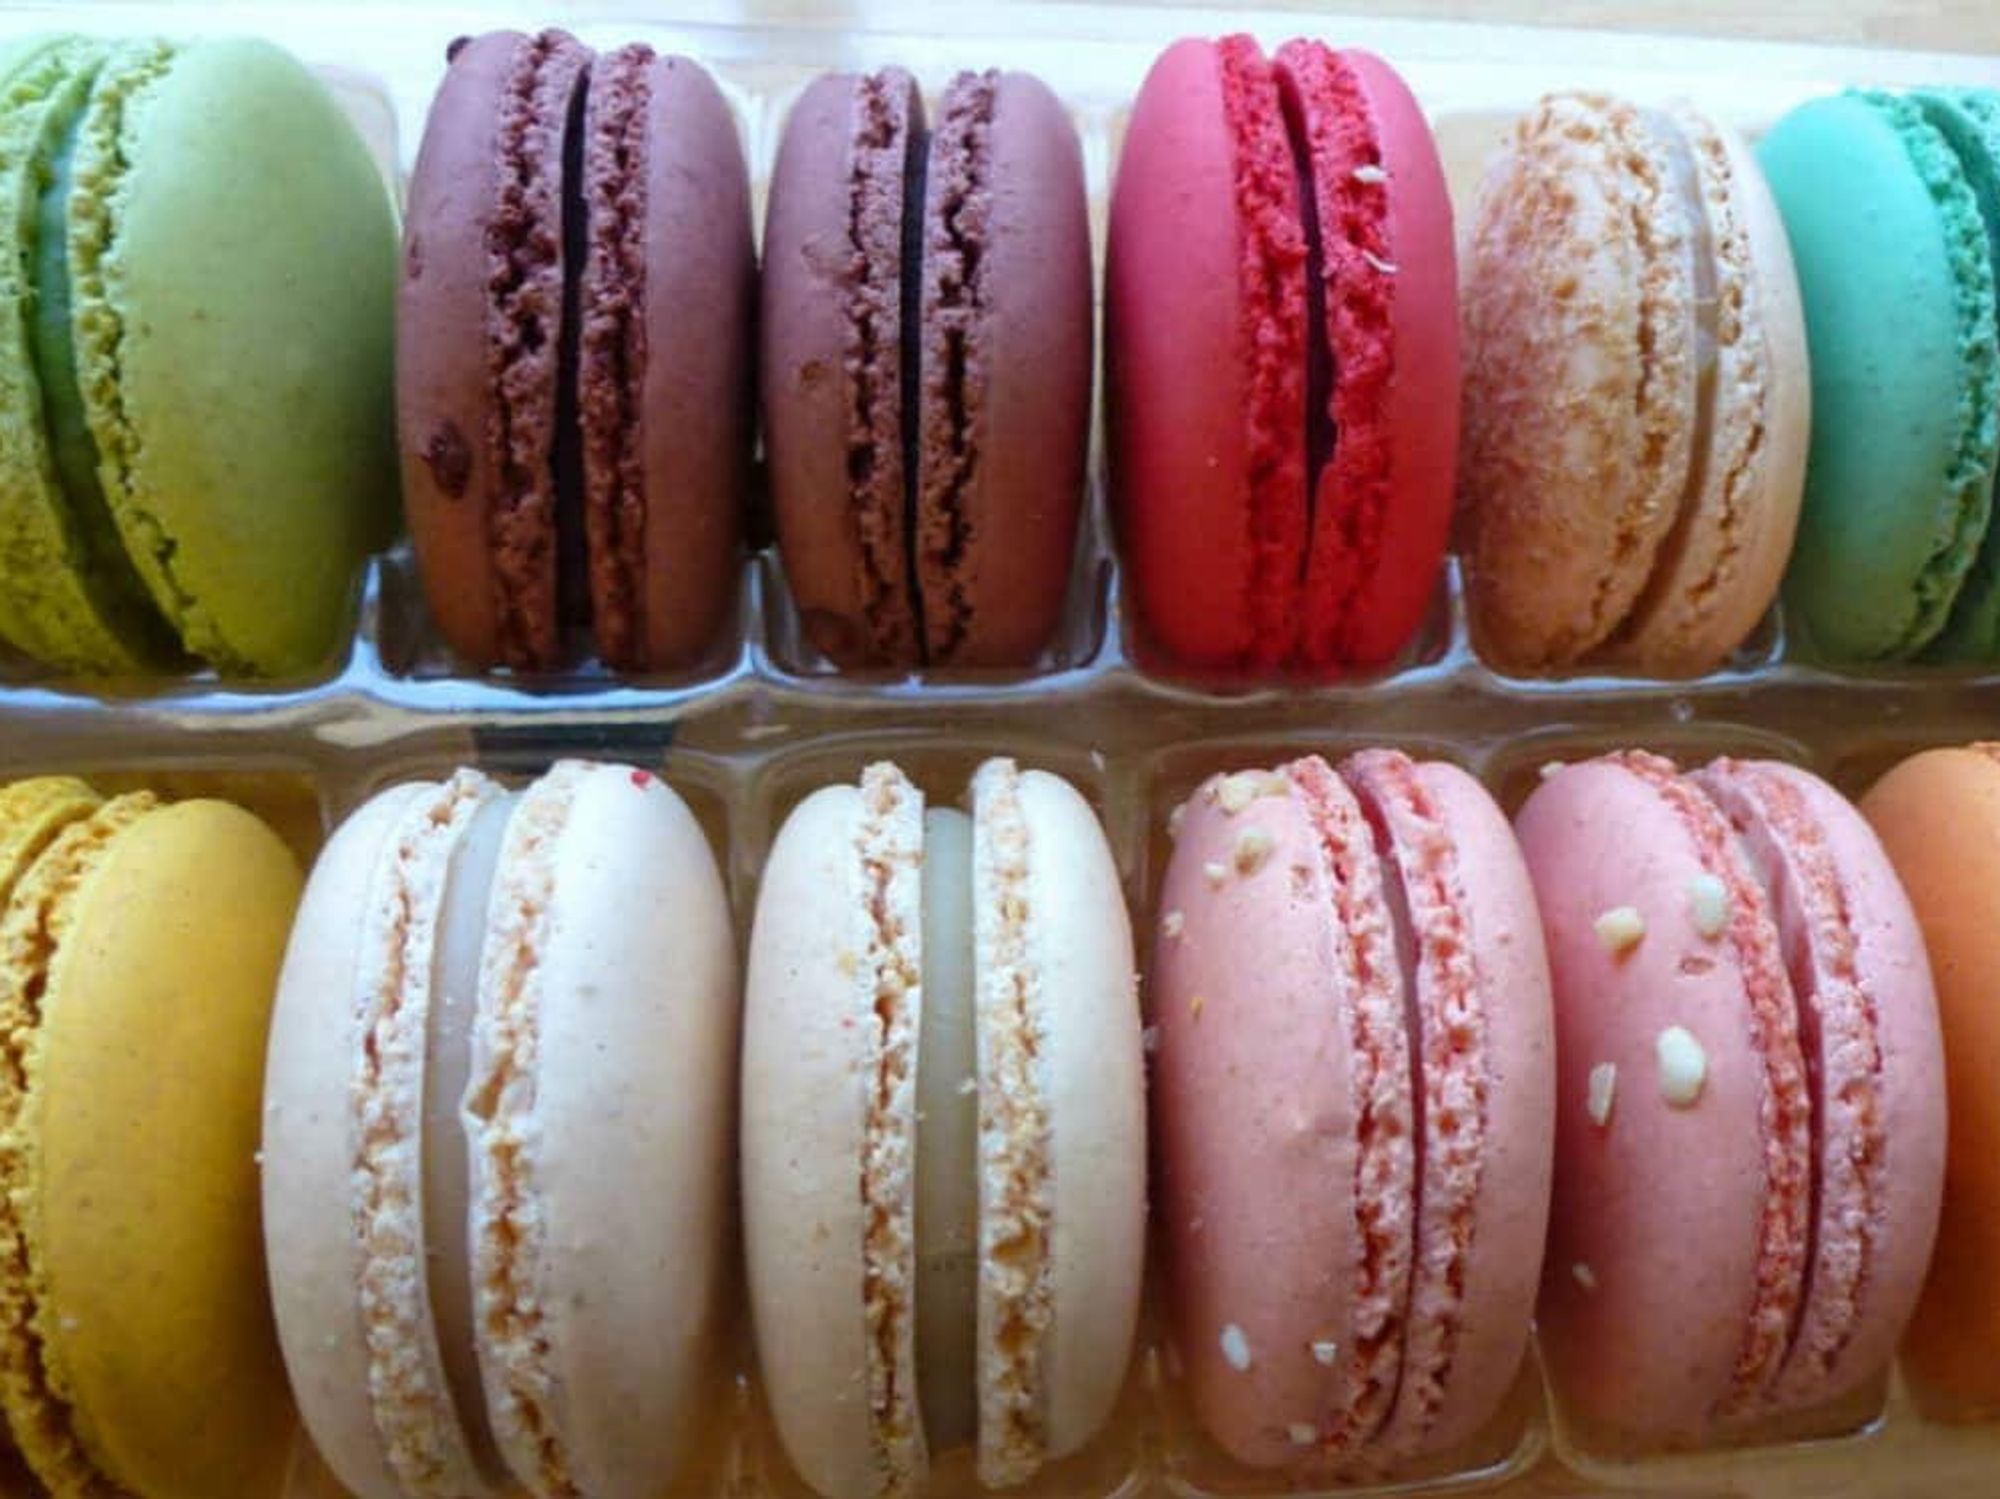 'Lette Macarons